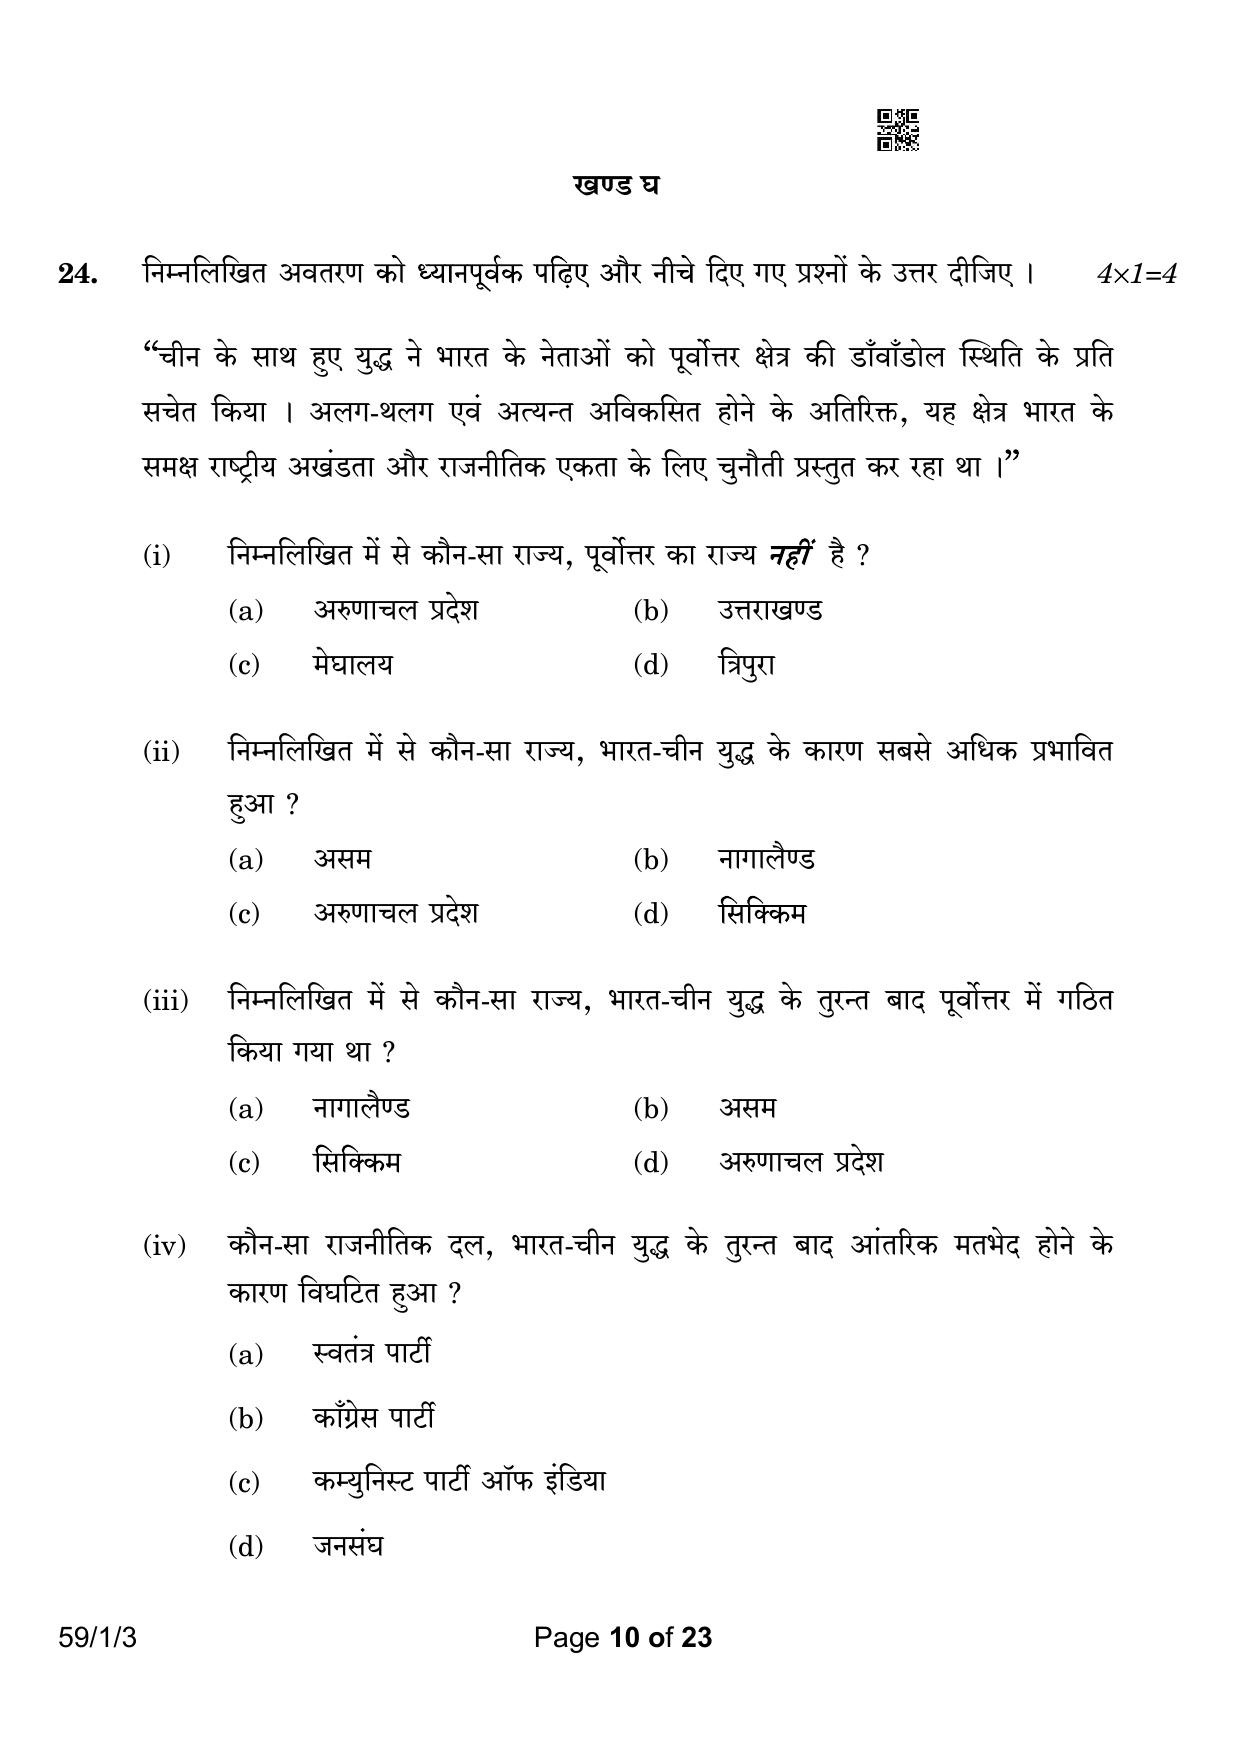 CBSE Class 12 59-1-3 Political Science 2023 Question Paper - Page 10